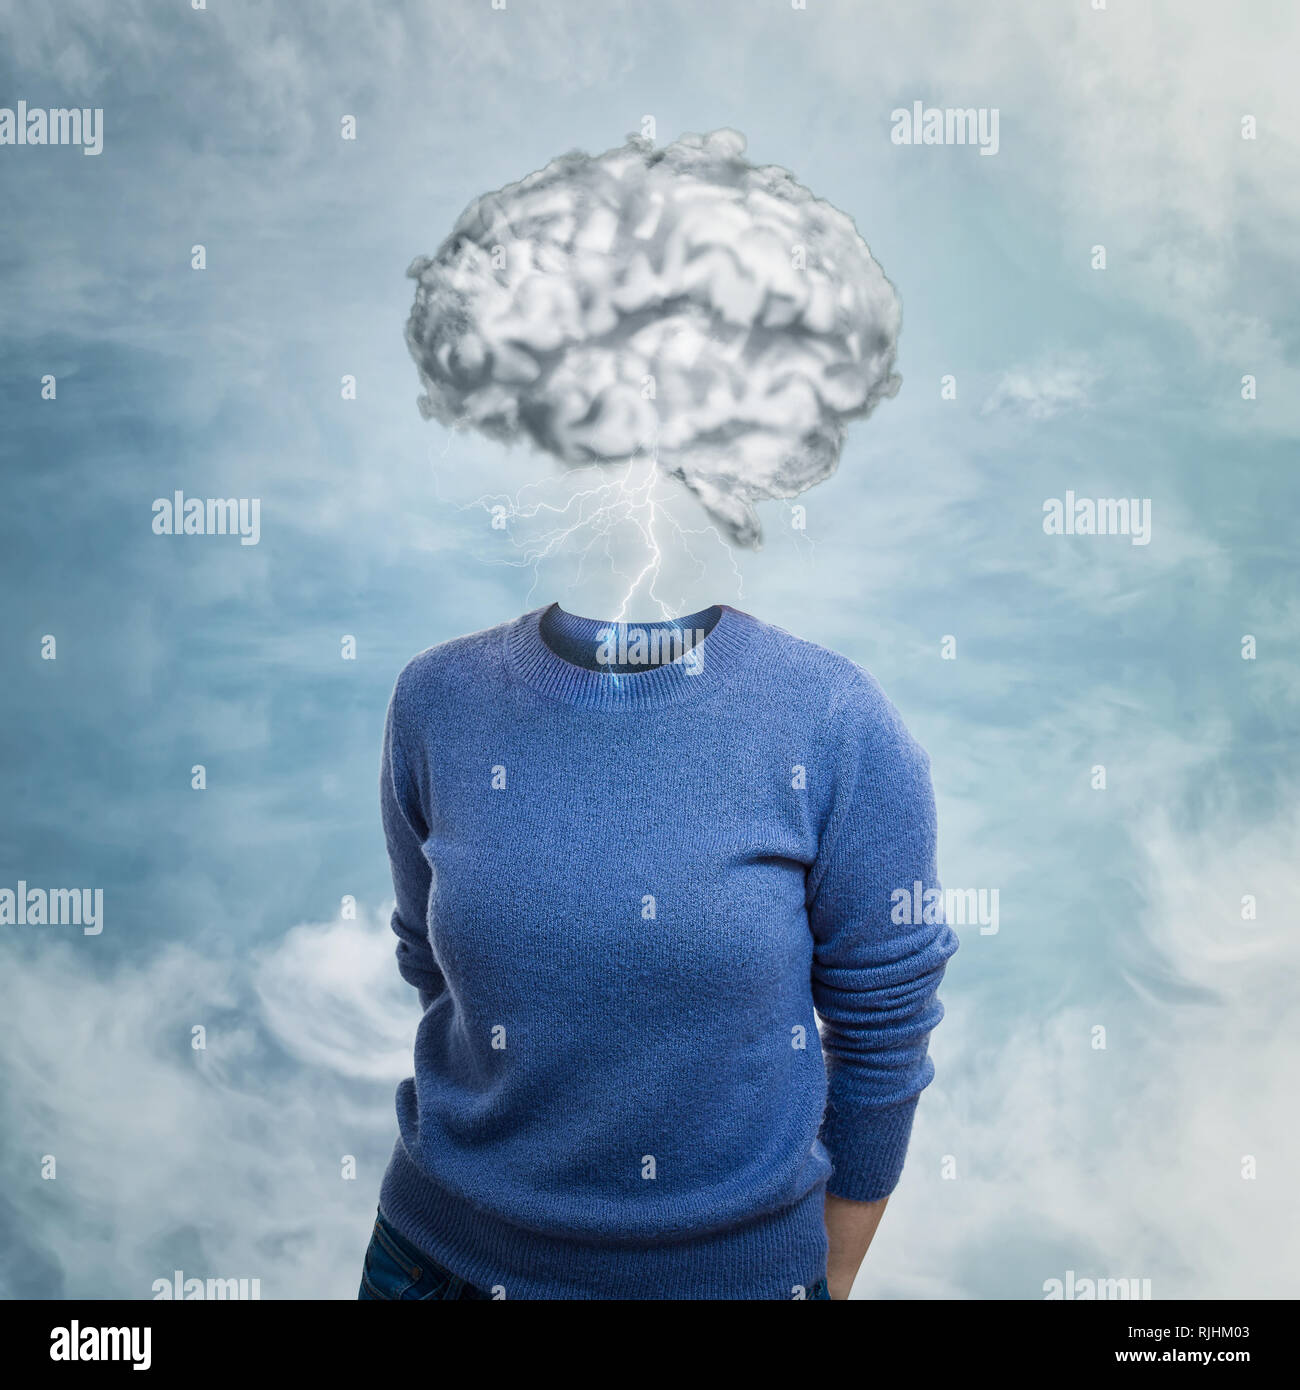 Brainstorm concept as woman has invisible face and cloud shaped brain instead of head. Incognito introvert hide identity. Head in the clouds person so Stock Photo